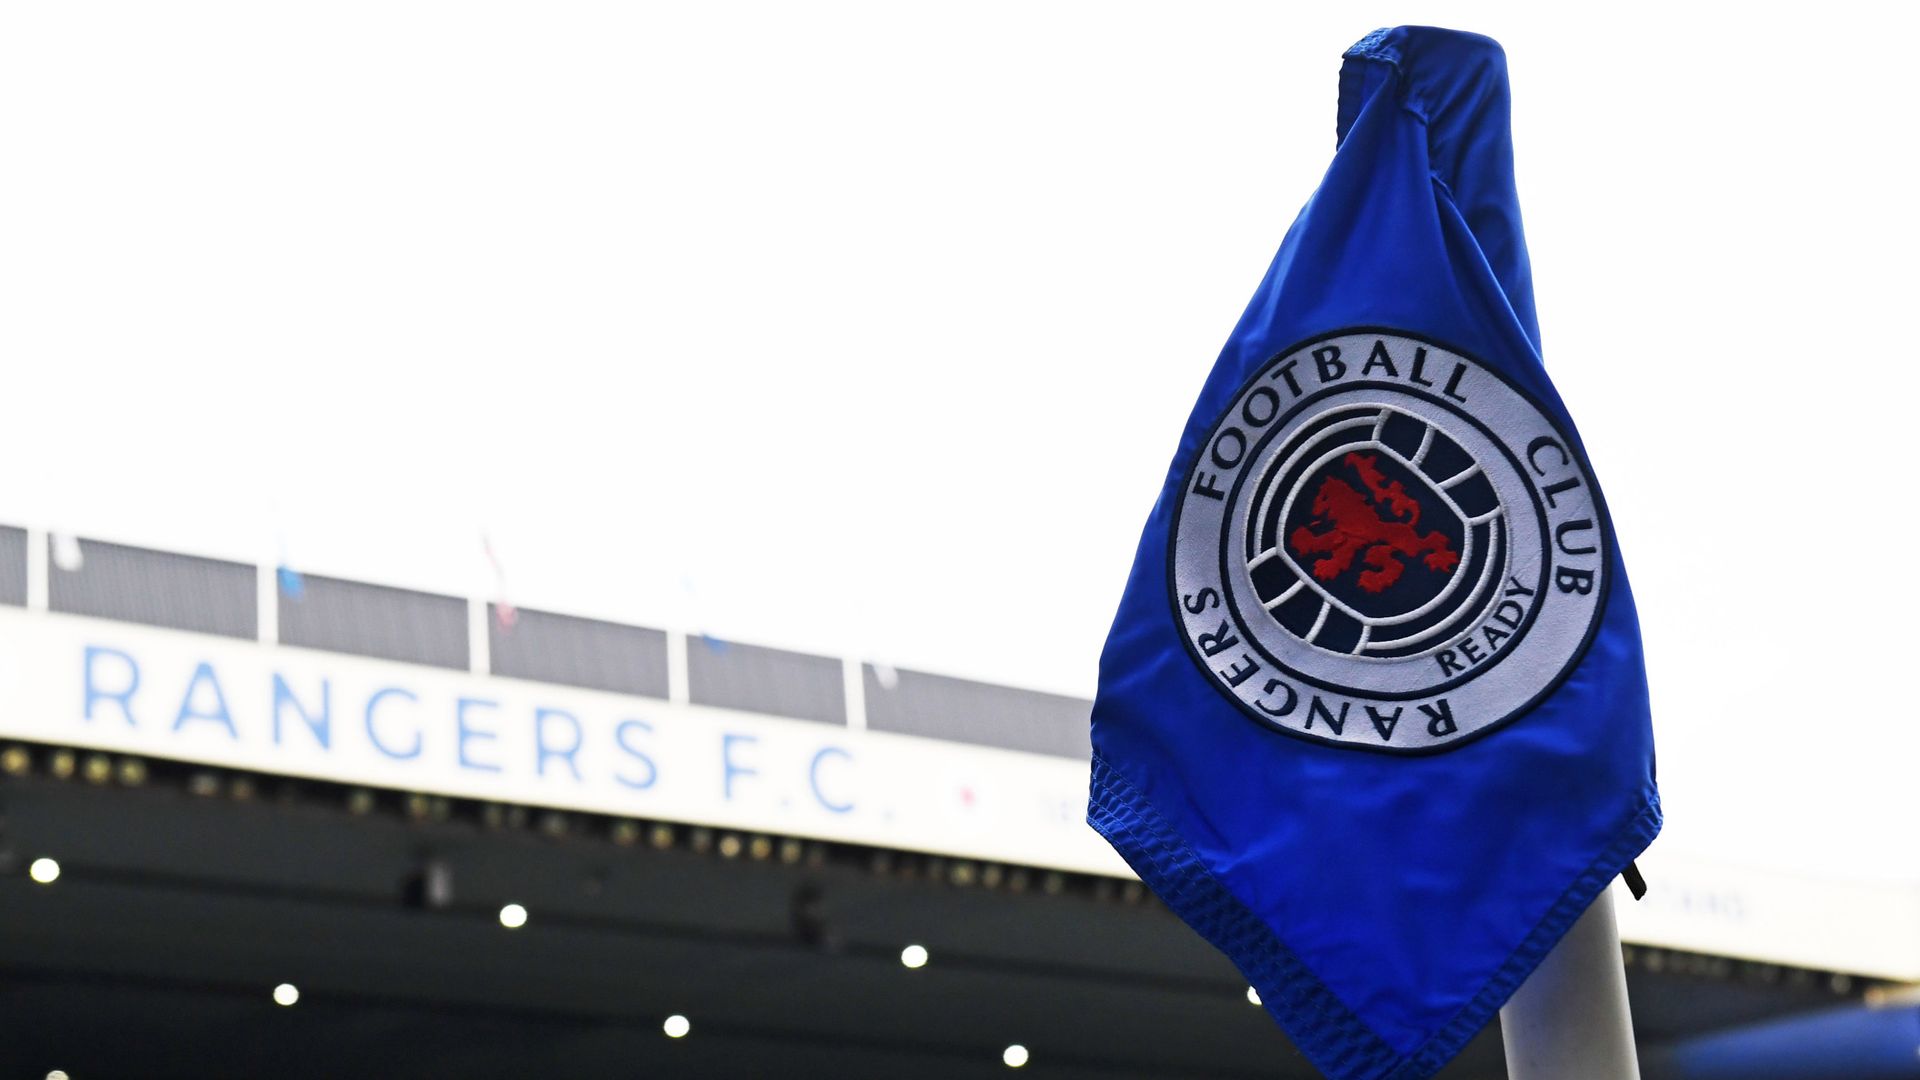 Clubs reject Rangers' bid for probe into SPFL conduct